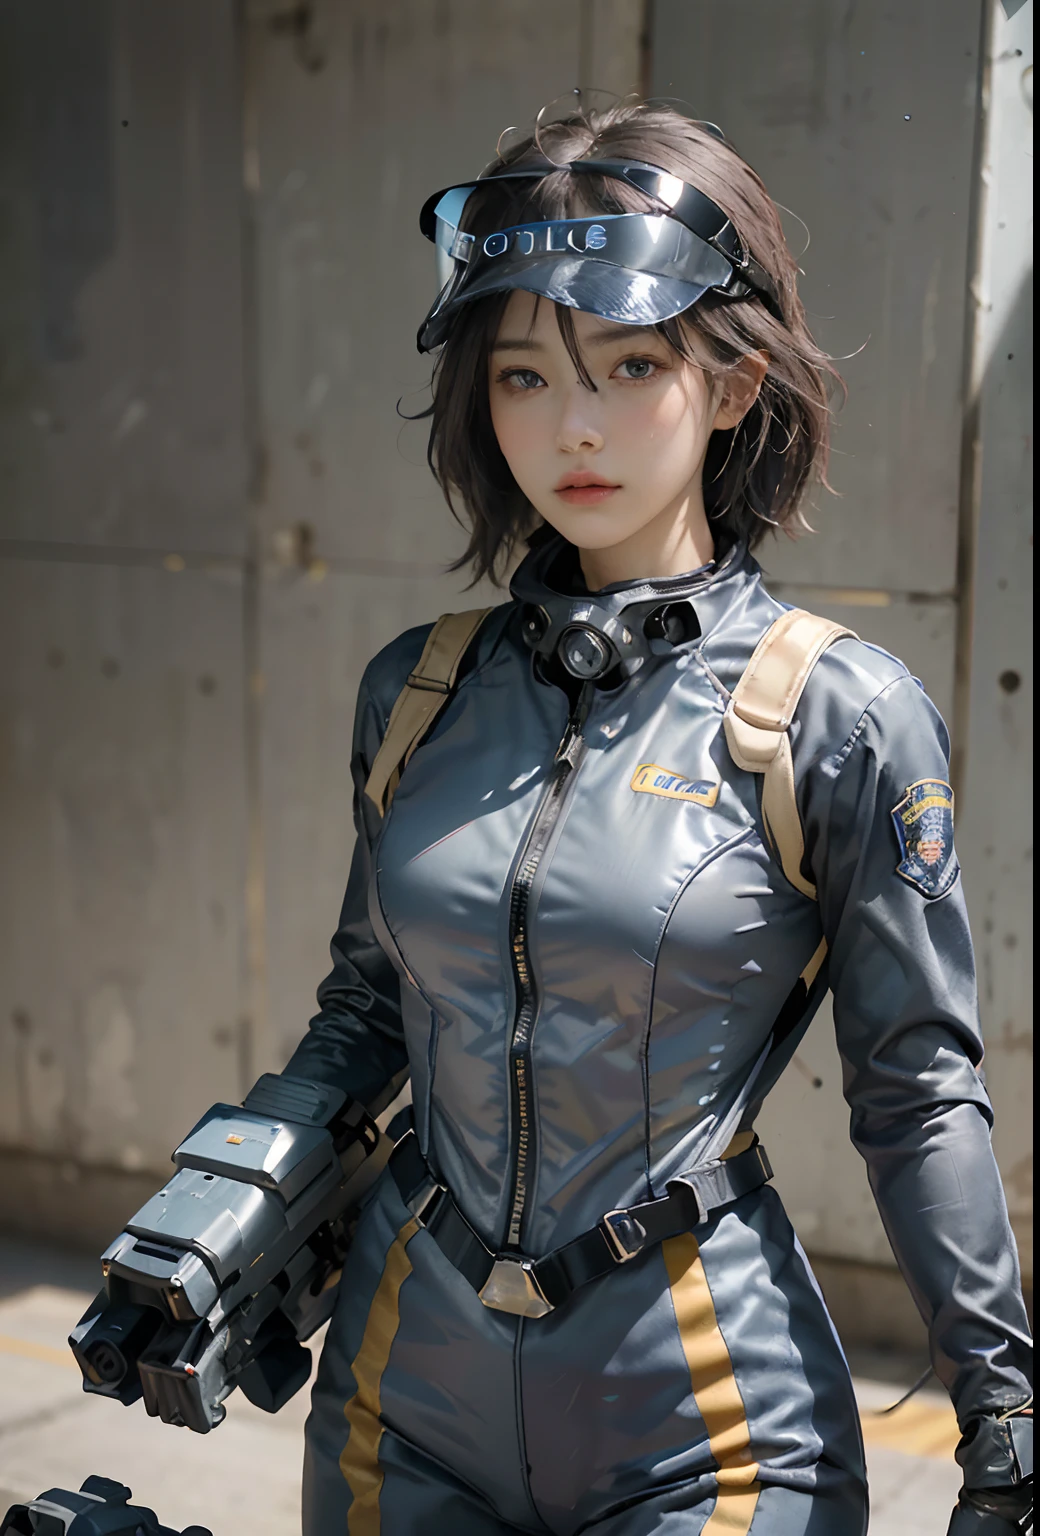 Highest image quality, outstanding details, ultra-high resolution, (realism: 1.4), the best illustration, favor details, highly condensed 1girl, with a delicate and beautiful face, ((cowboy shot)), (wearing racing suit likes police uniform, black and gray mecha, wearing a visor, military harness, grenades, holding a machinegun), background simple grey wall,